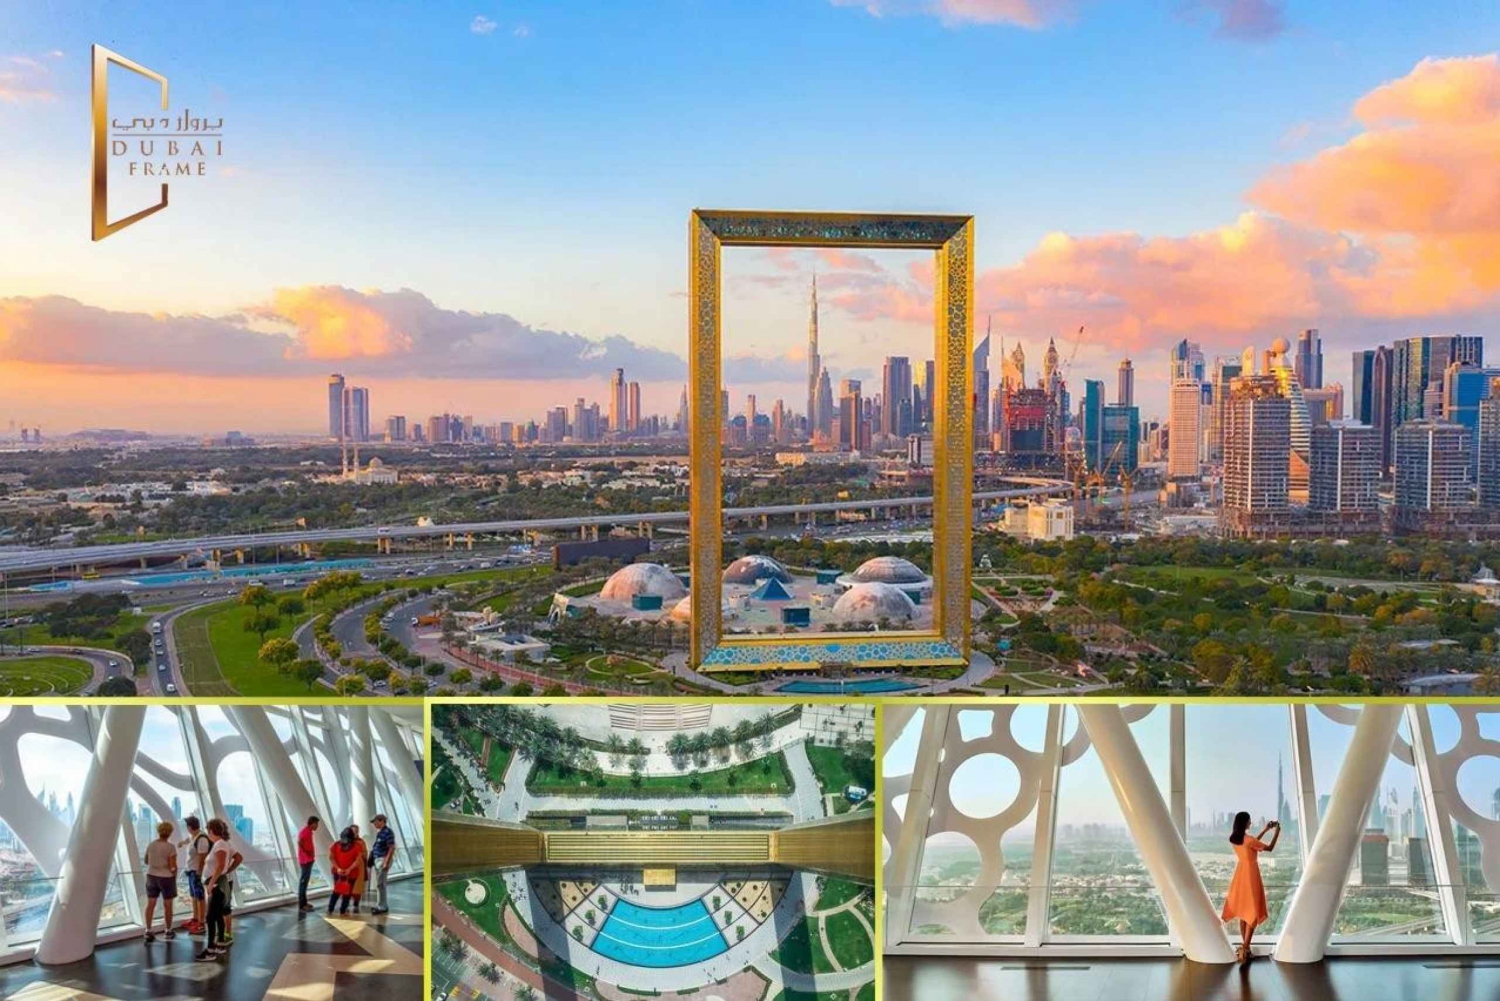 Dubai city tour with all tourist attractions